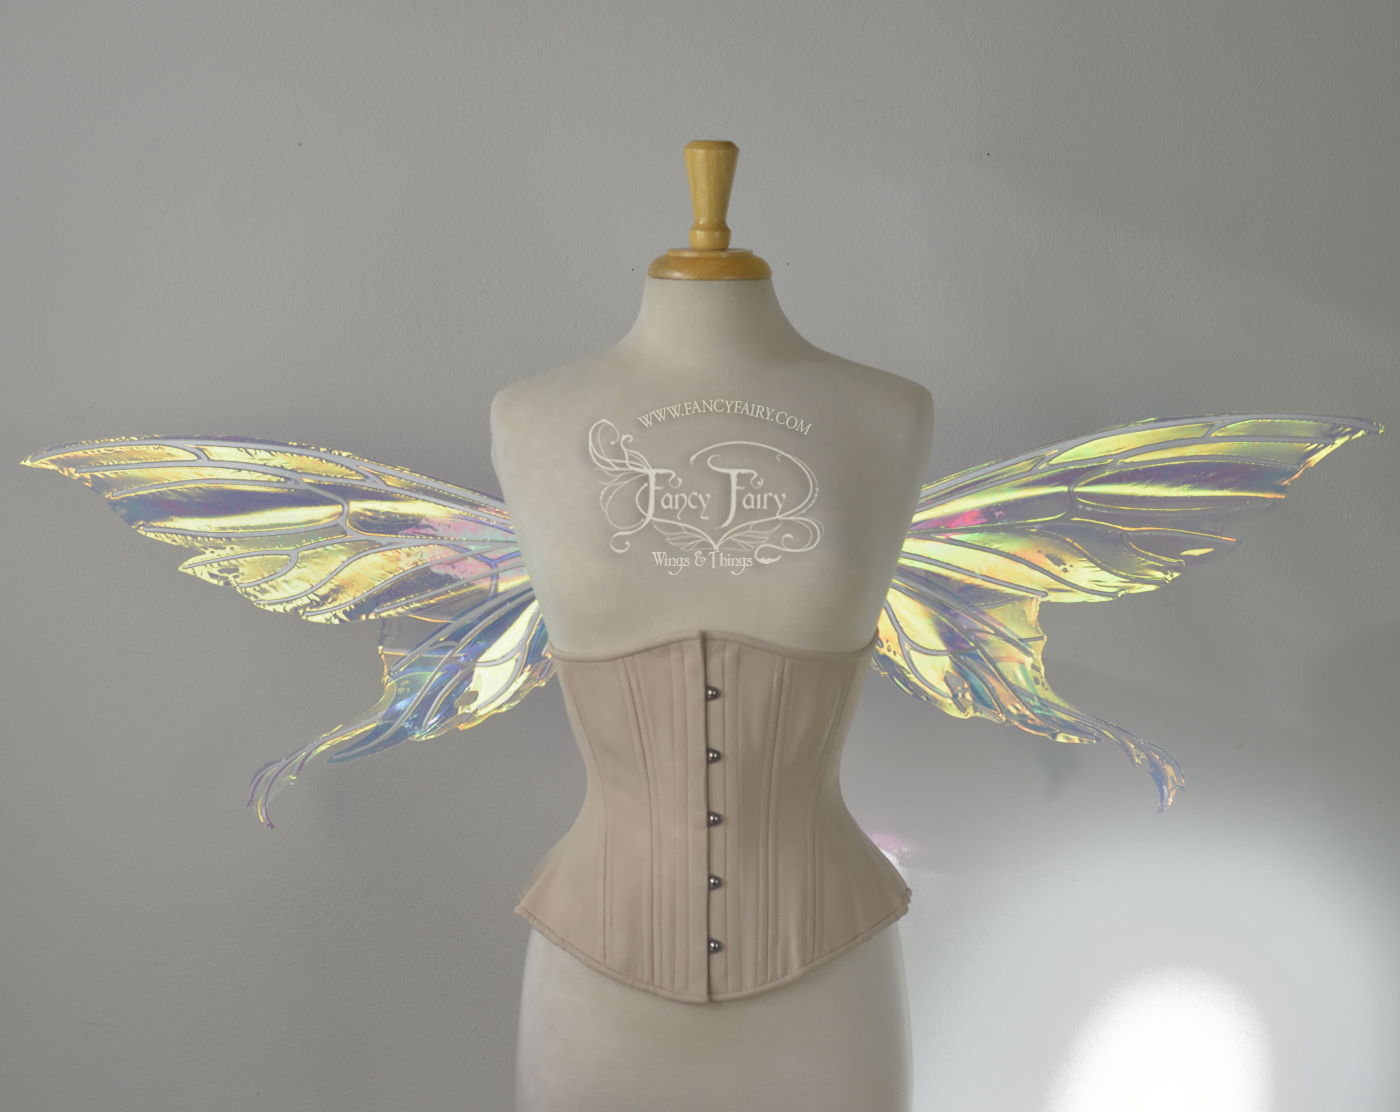 Aynia / Morgana Hybrid Iridescent Fairy Wings in Clear Diamond Fire with Pearl veins